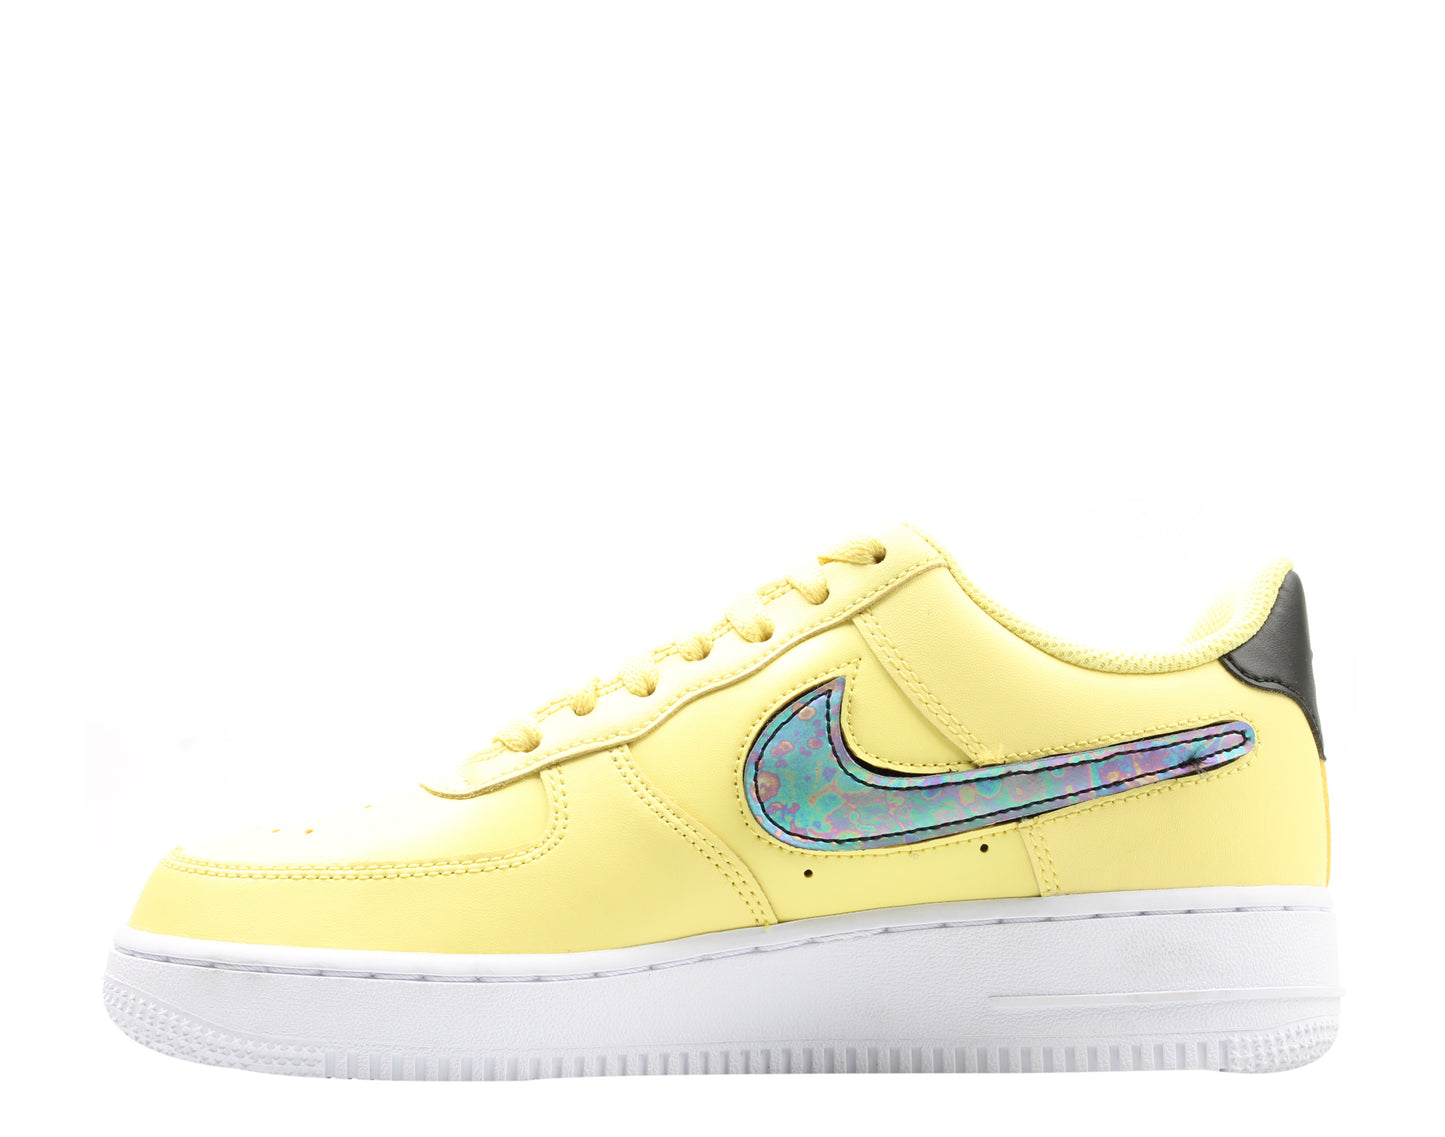 Nike Air Force 1 '07 LV8 3 Yellow Pulse Men's Basketball Shoes CI0067-700